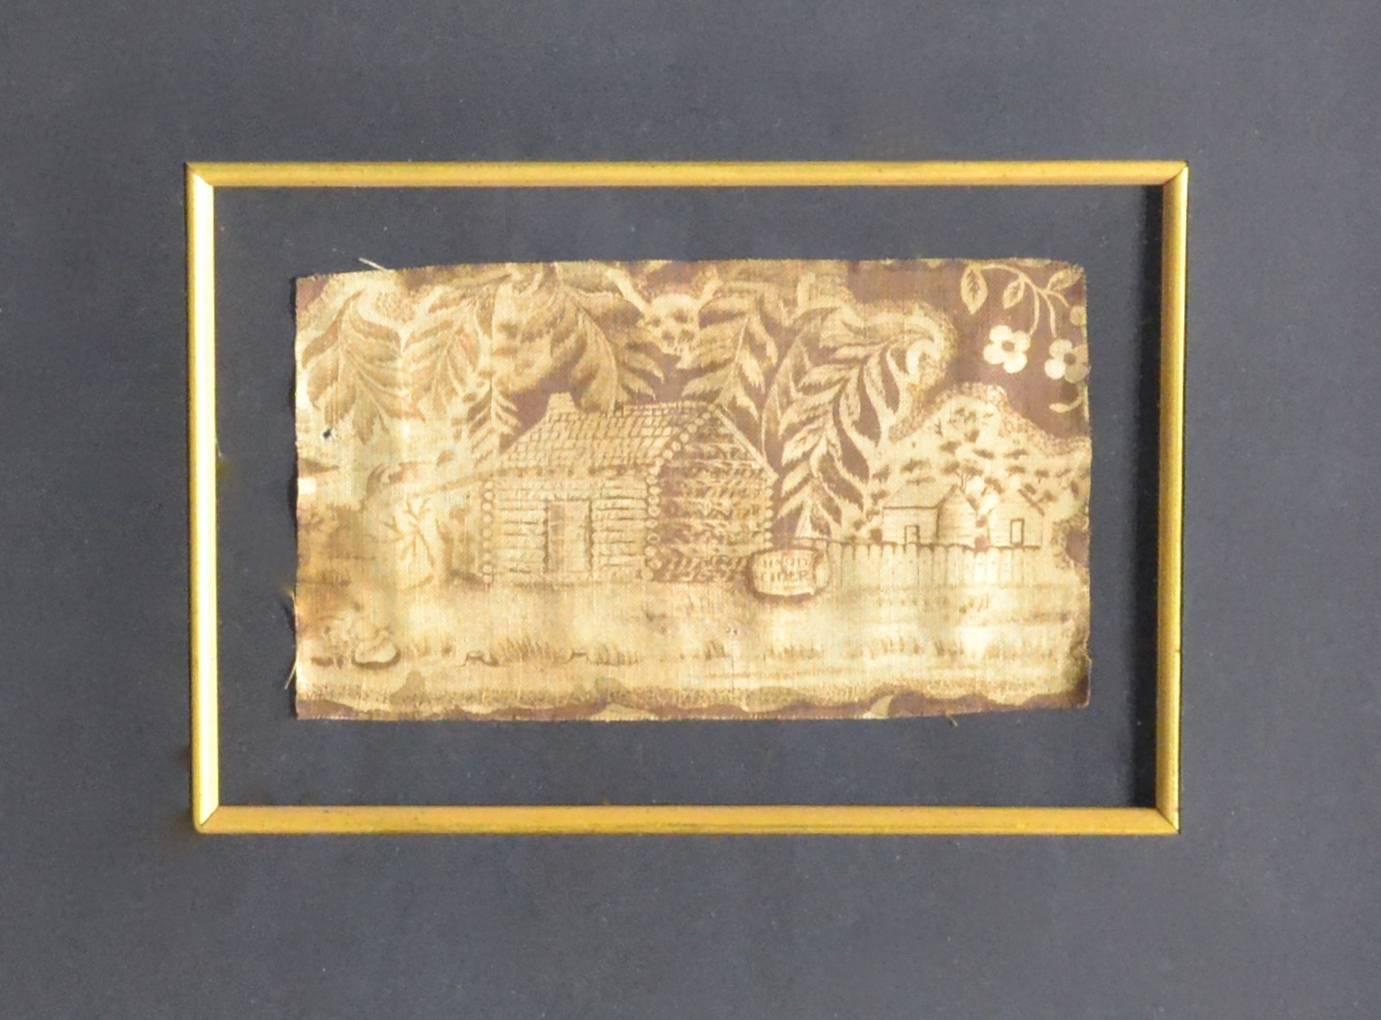 Remnant from an original antique Presidential Campaign textile for President Andrew Jackson. It features a log cabin which was one of his Campaign slogans. He was our 7th President circa 1820.
Size approximately 4"x6" frame 21" x